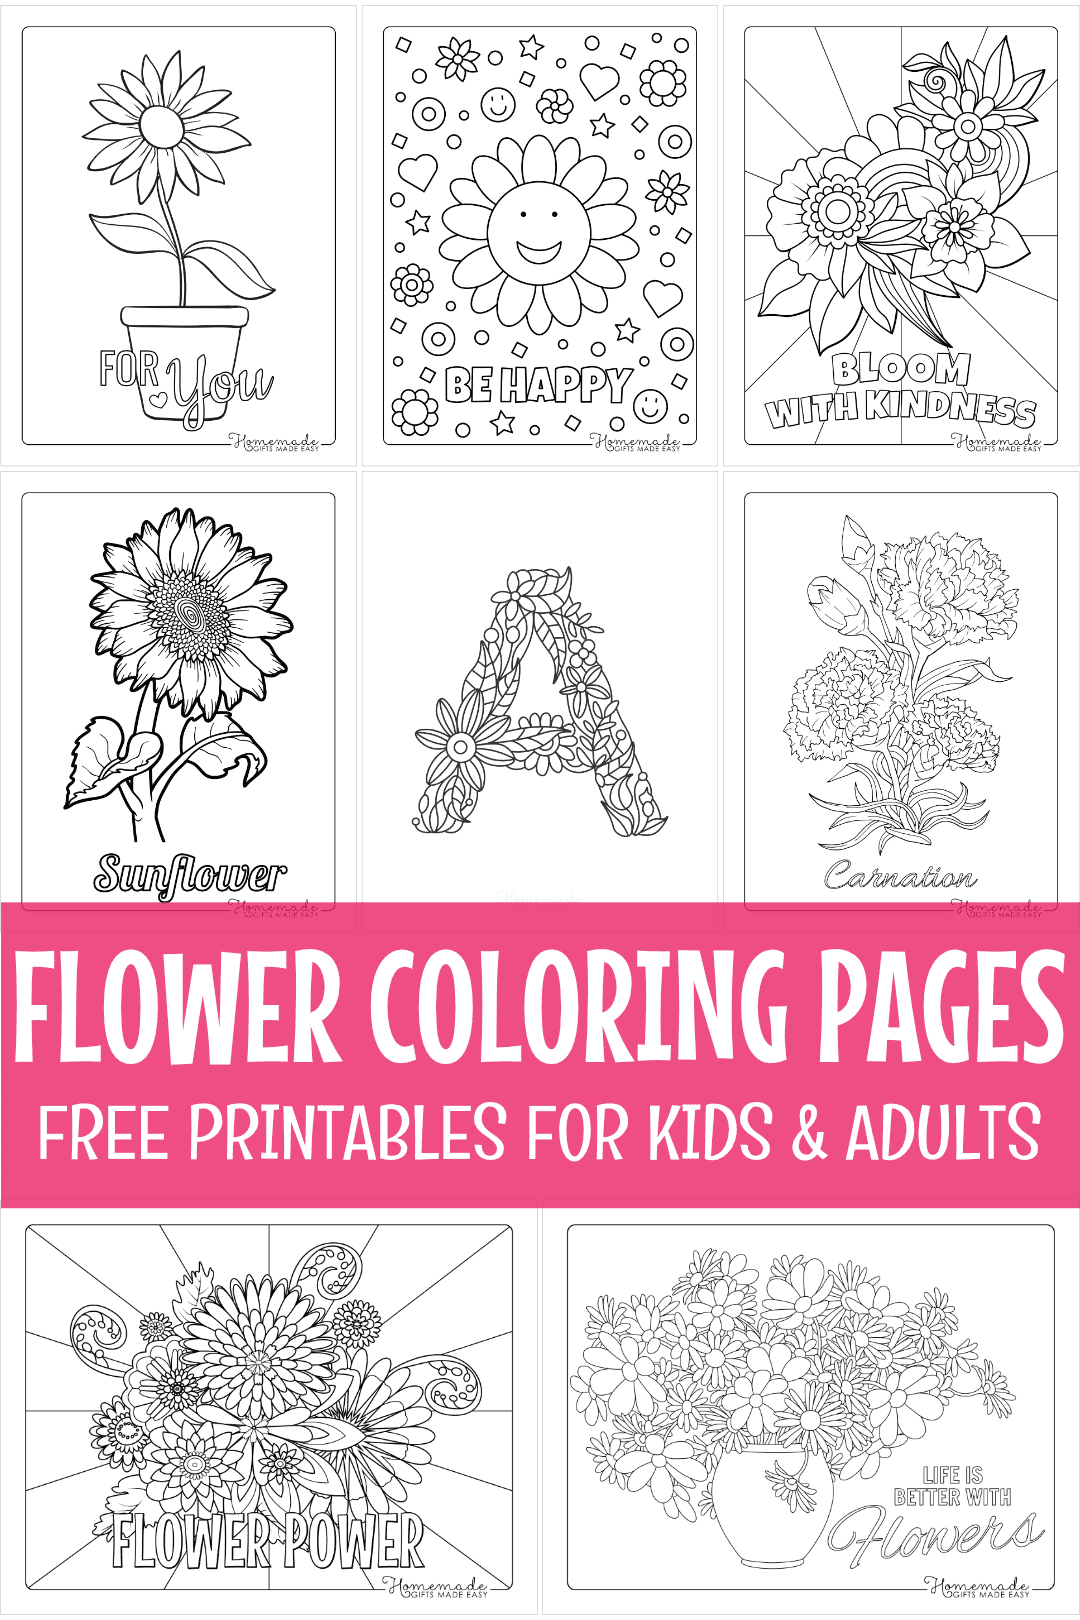 112-beautiful-flower-coloring-pages